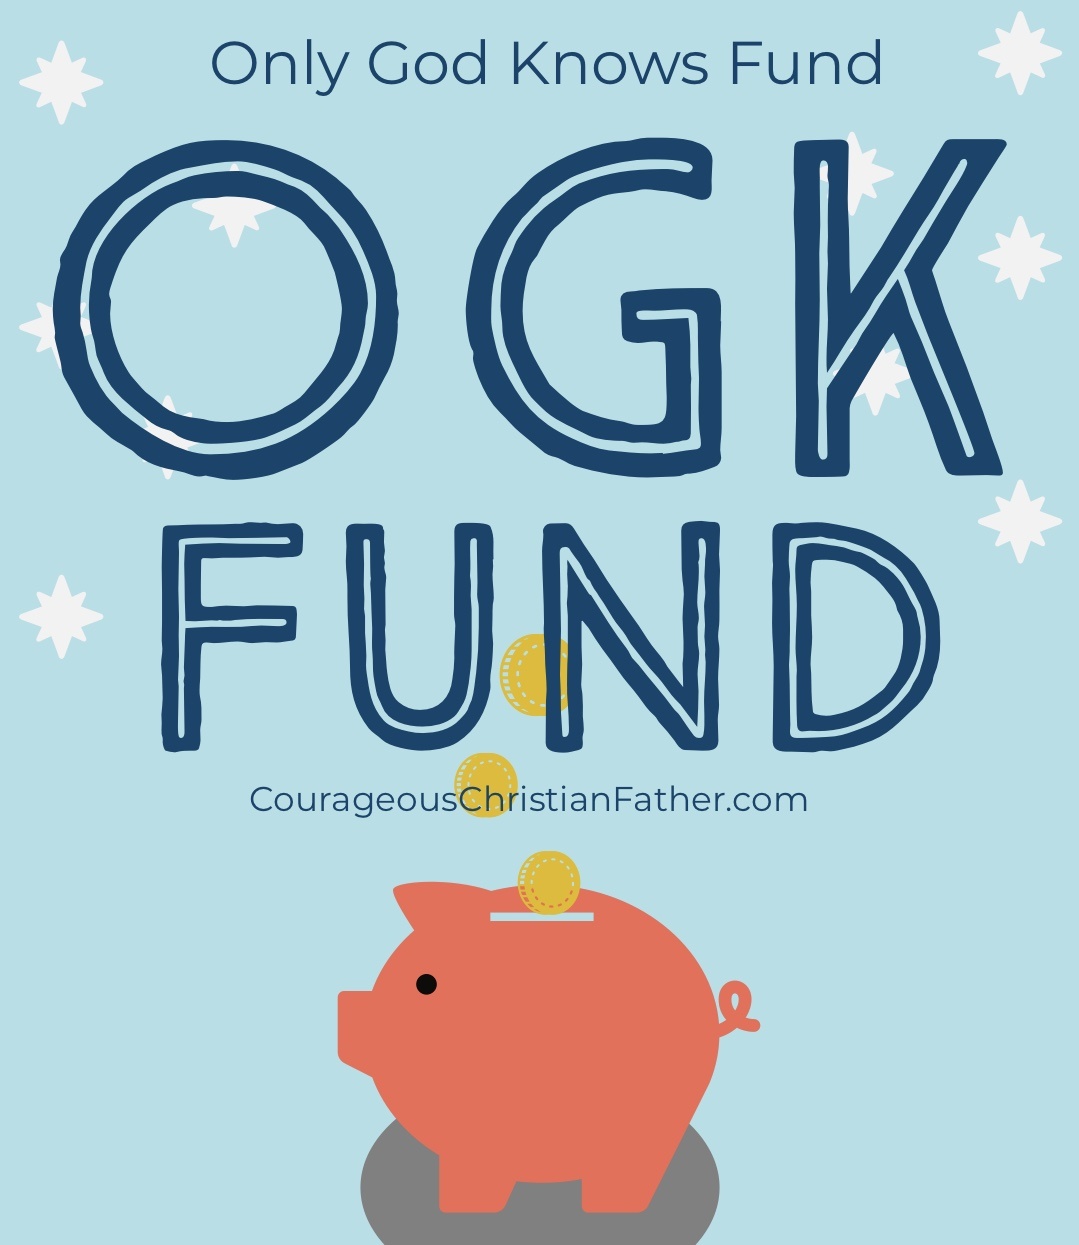 OGK Fund (Only God Knows Fund) - Similar to a rainy day fun. This one you put money aside and keep it until you need for a situation that only God knew you would need it. #OGKFund 